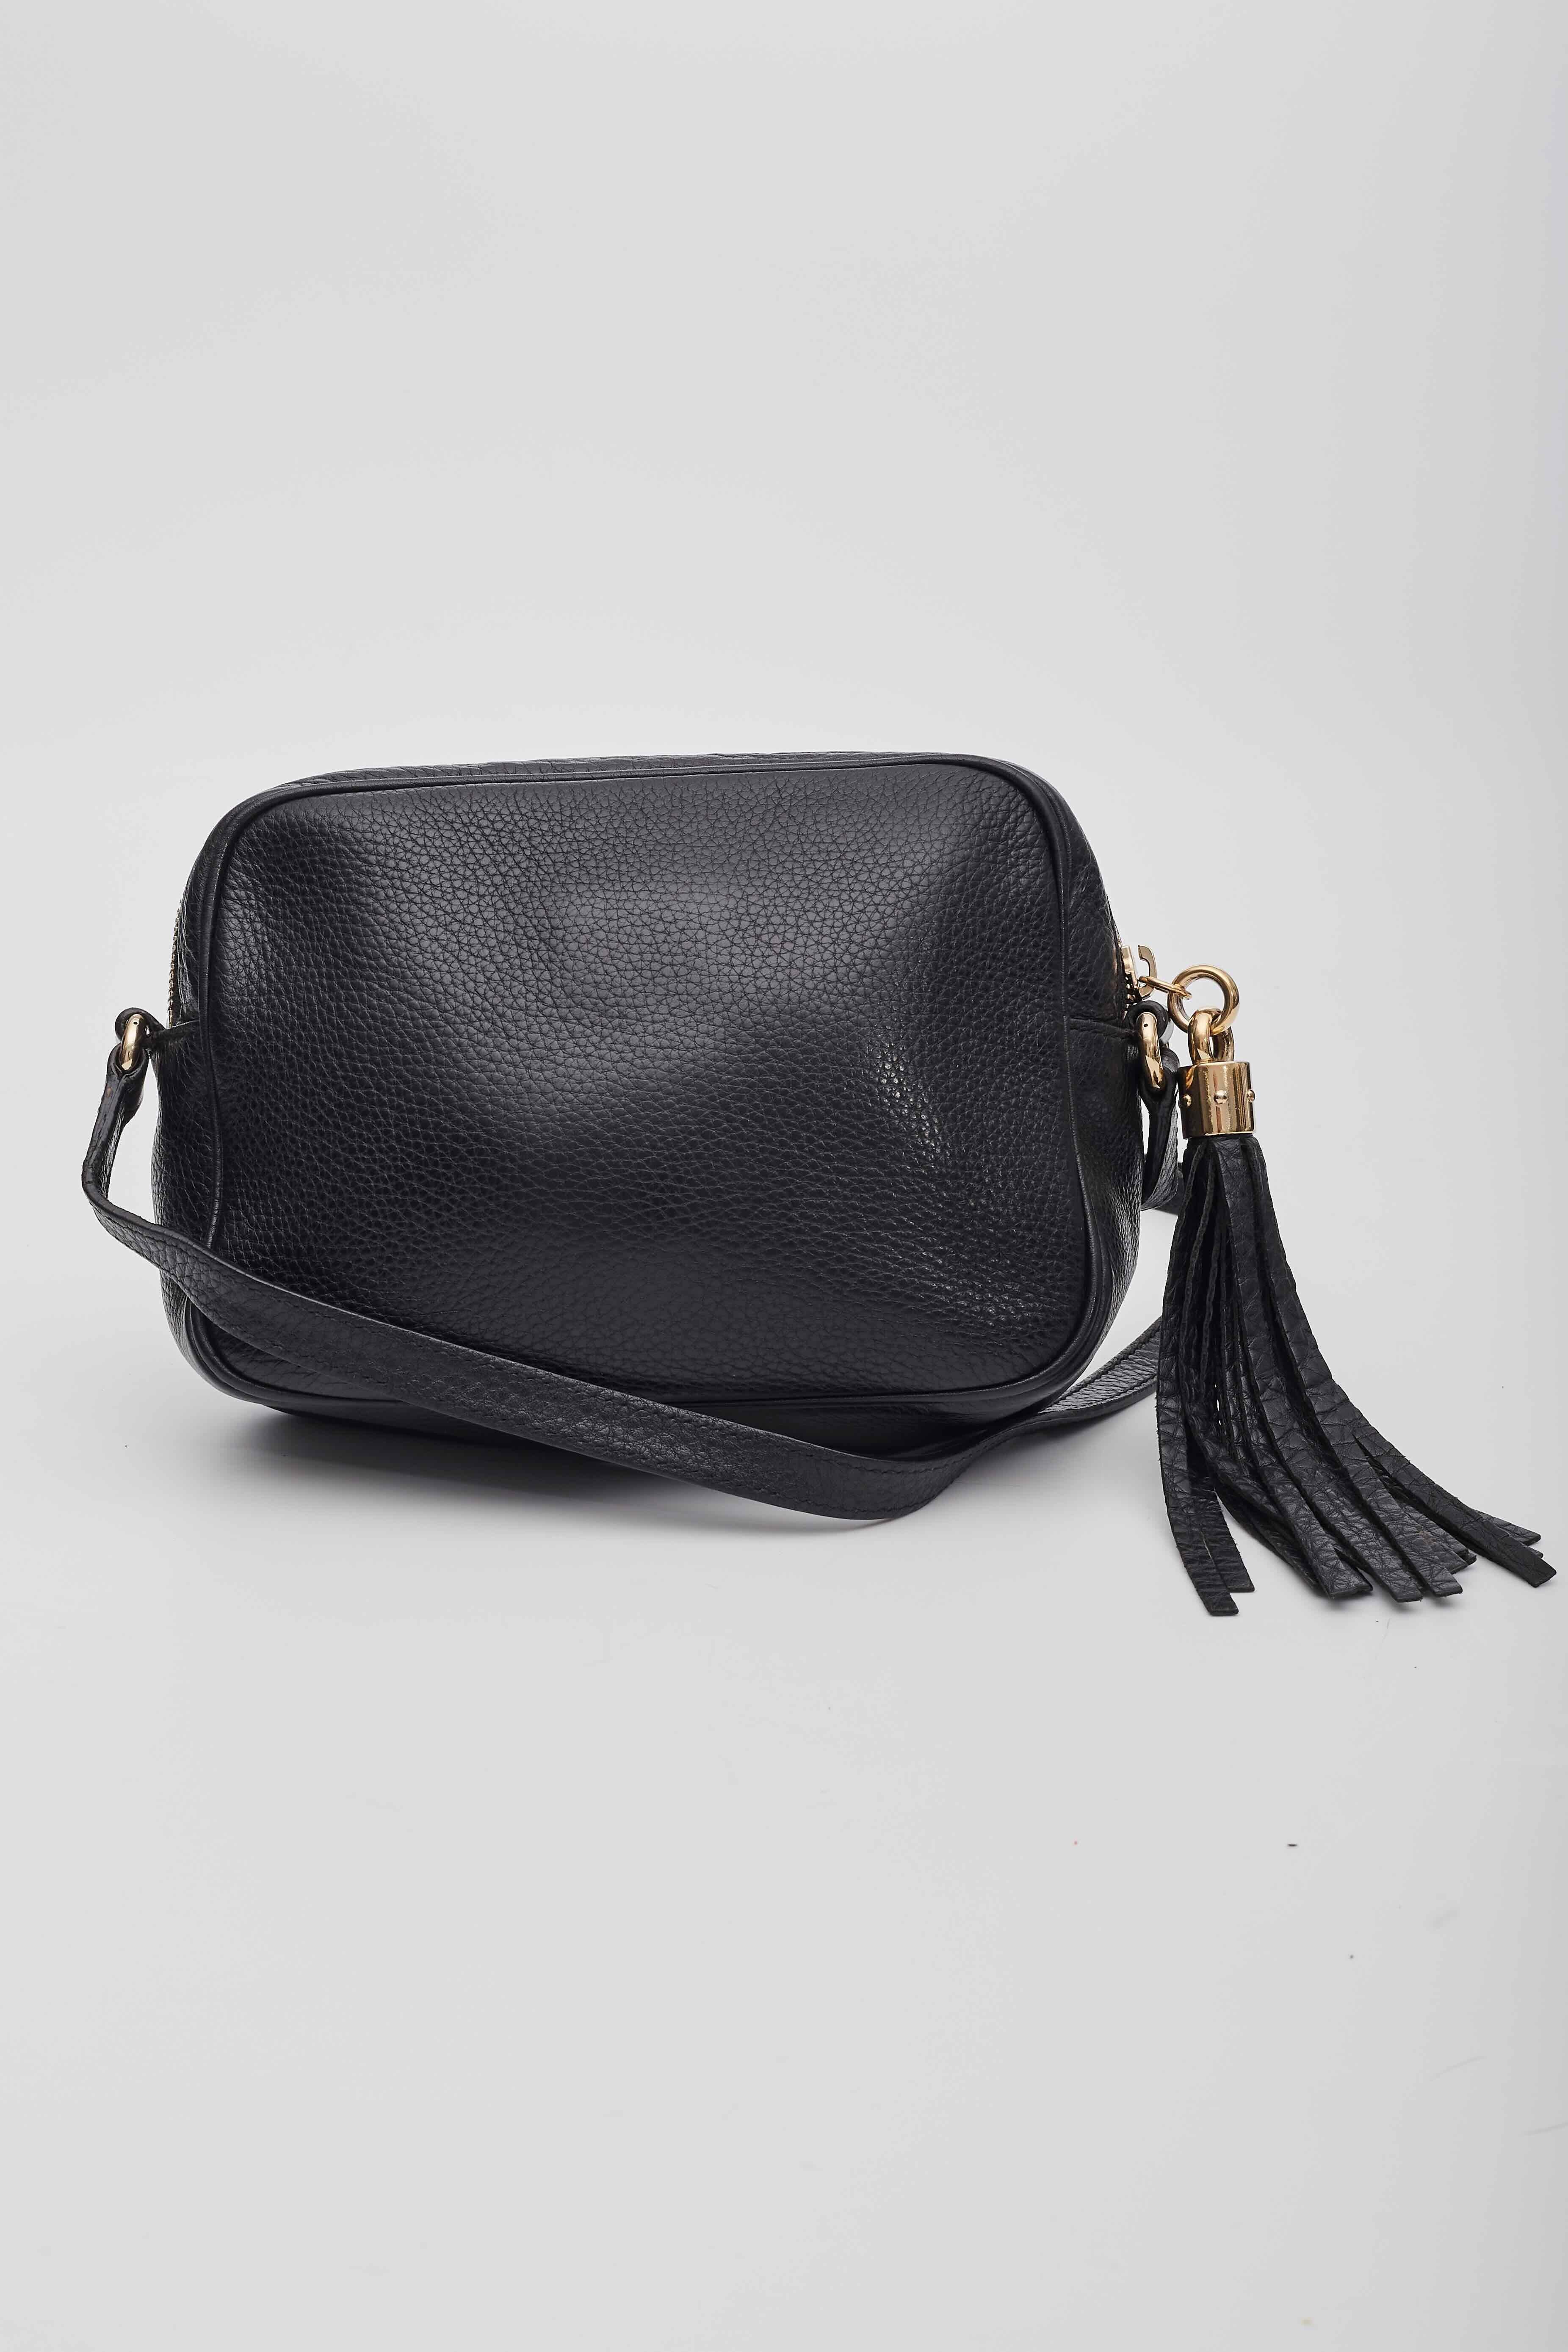 This crossbody bag is made of pebbled calfskin leather in black, with a prominent Gucci GG logo stitched on the front. The bag features an adjustable leather shoulder strap with polished gold hardware. The matching gold-knobbed leather tassel zipper